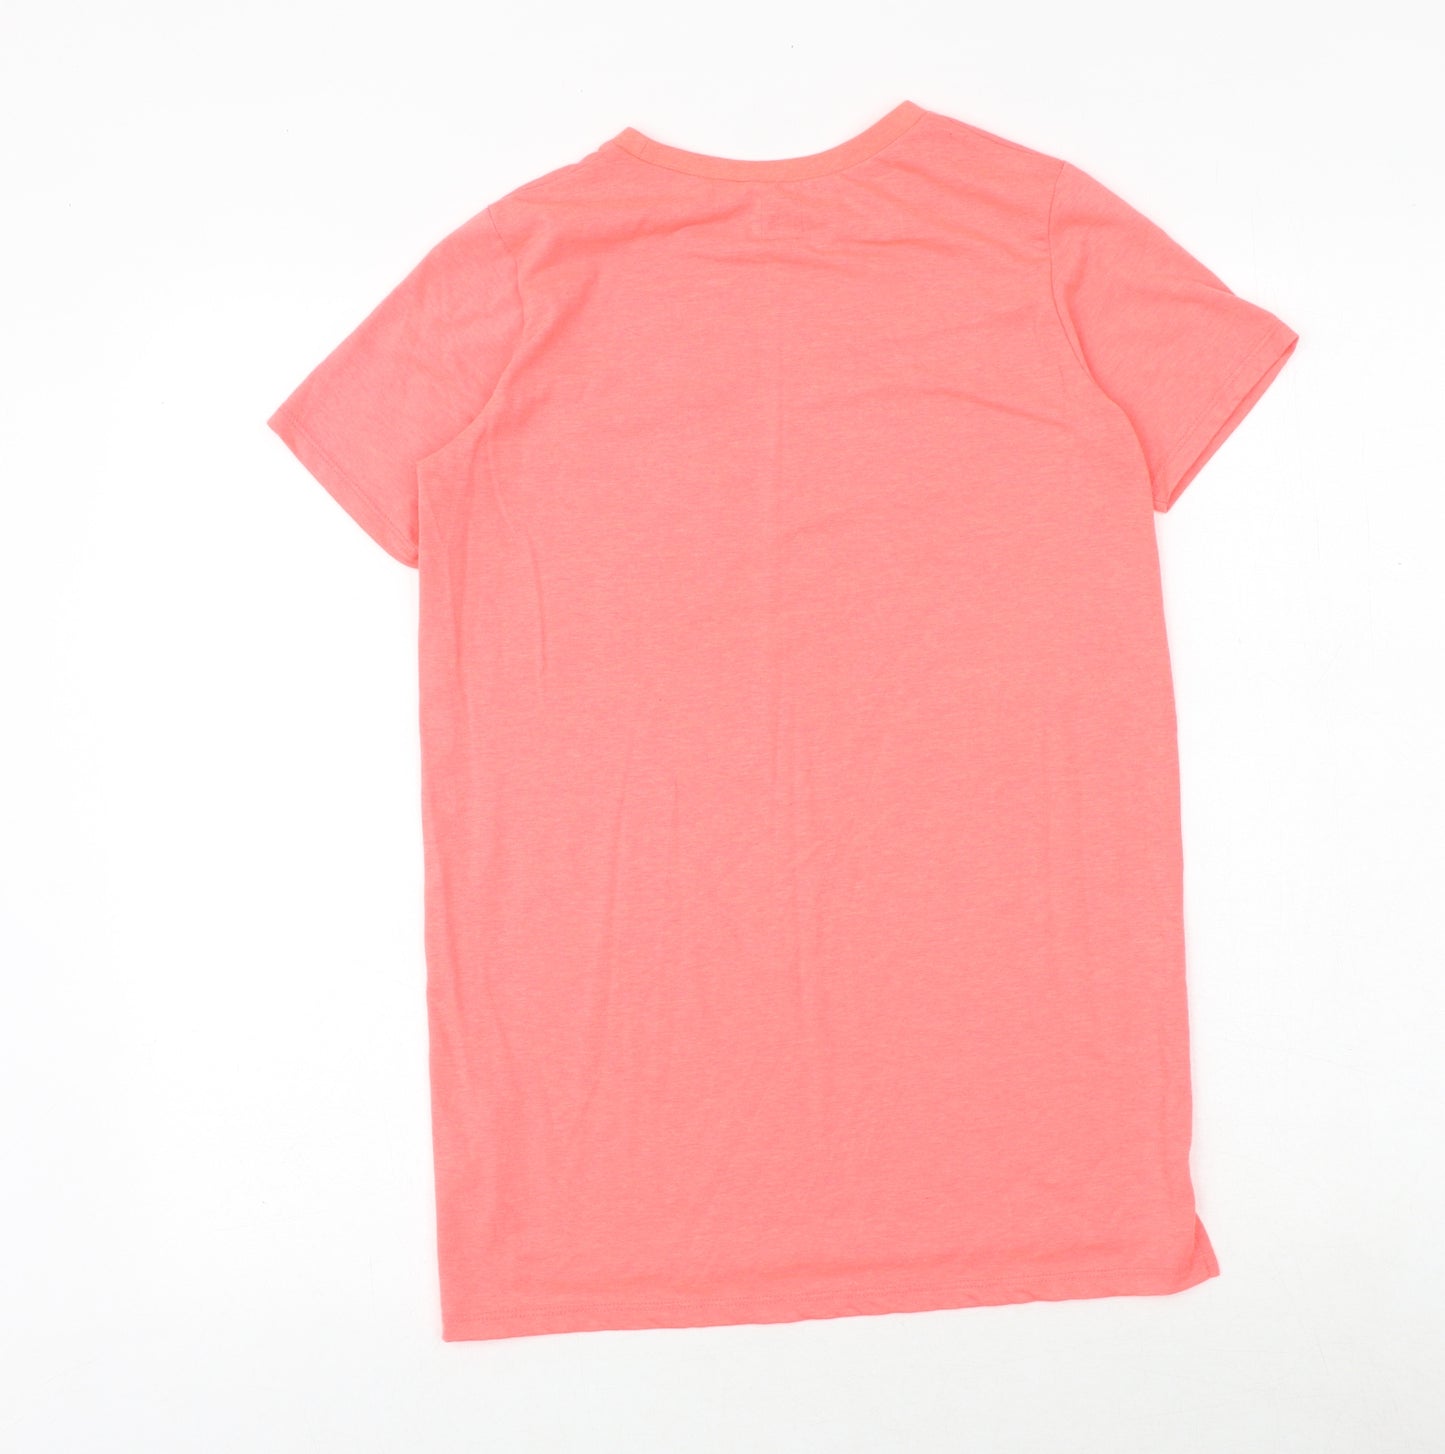 River Island Boys Pink Cotton Basic T-Shirt Size 11-12 Years Crew Neck Pullover